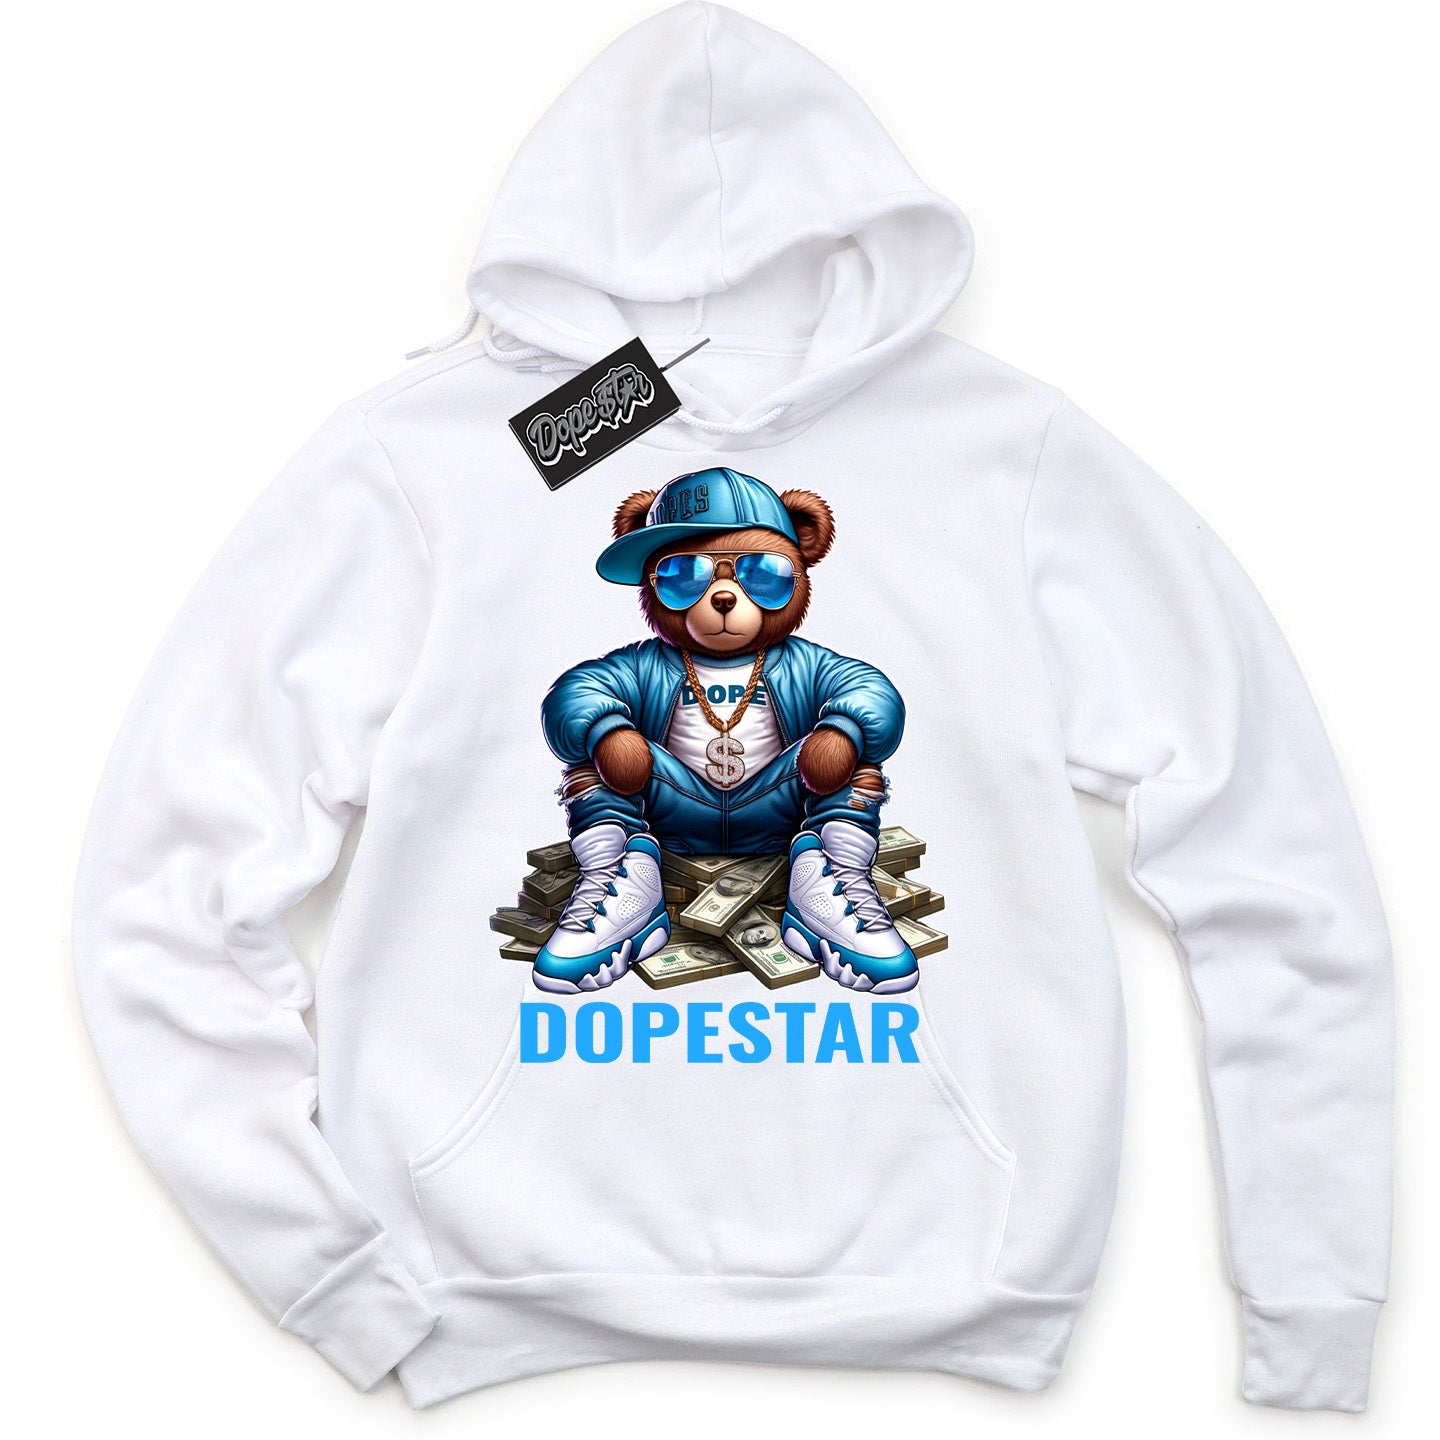 Cool White Graphic DopeStar Hoodie with “  Dope Bear “ print, that perfectly matches Powder Blue 9s sneakers